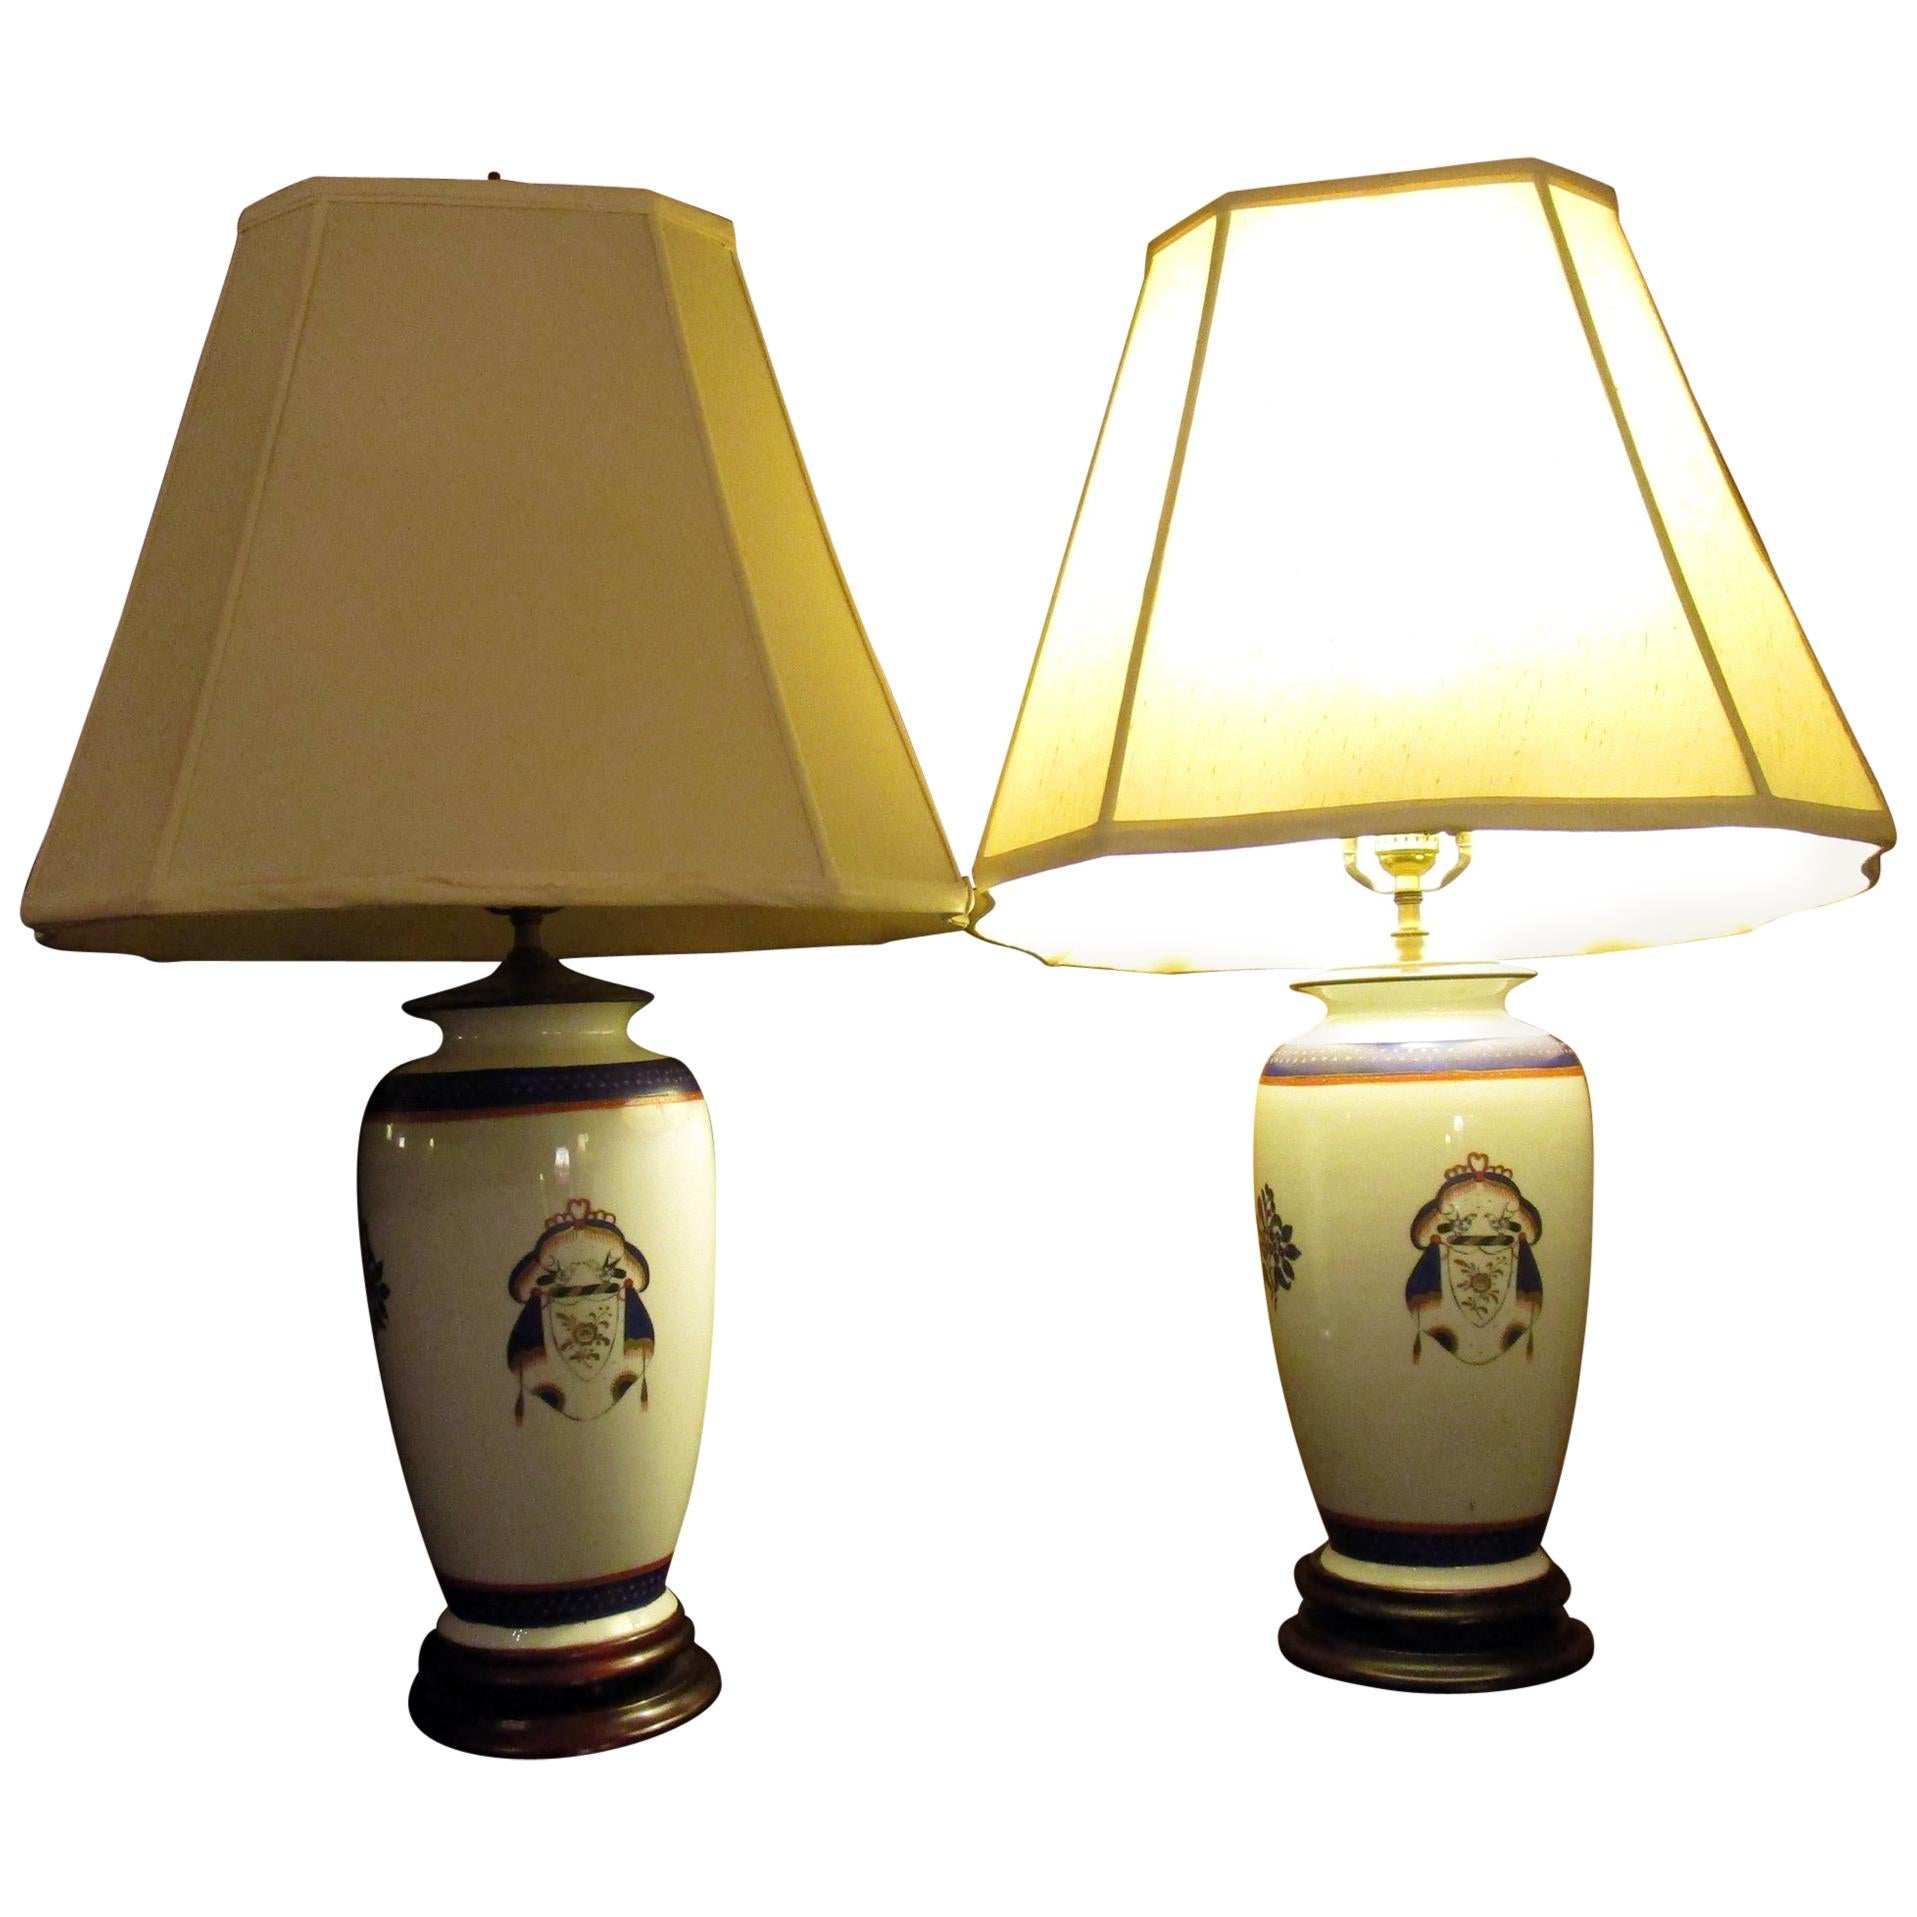 18th century Chinese Export Porcelain Vase Pair as Lamps